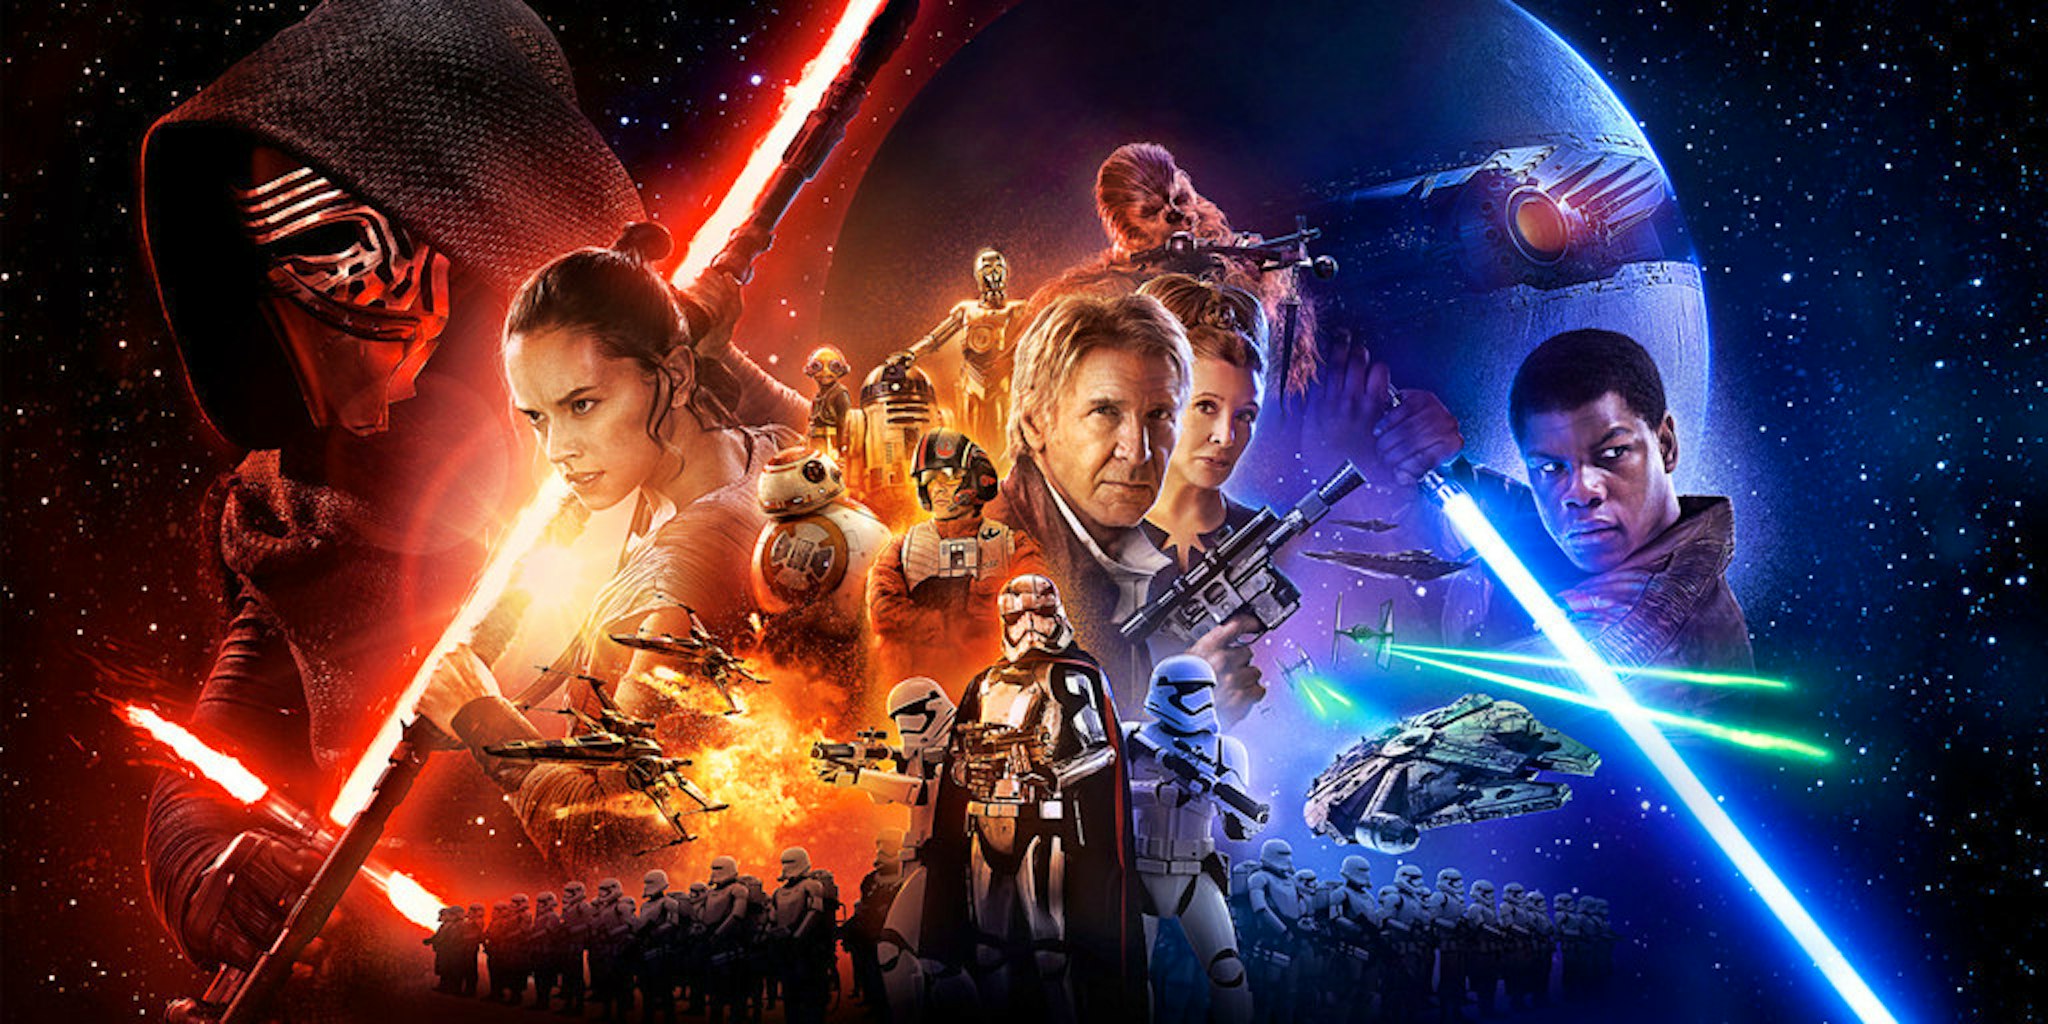 The 'Star Wars: Force Awakens' Chinese Poster Looks ...